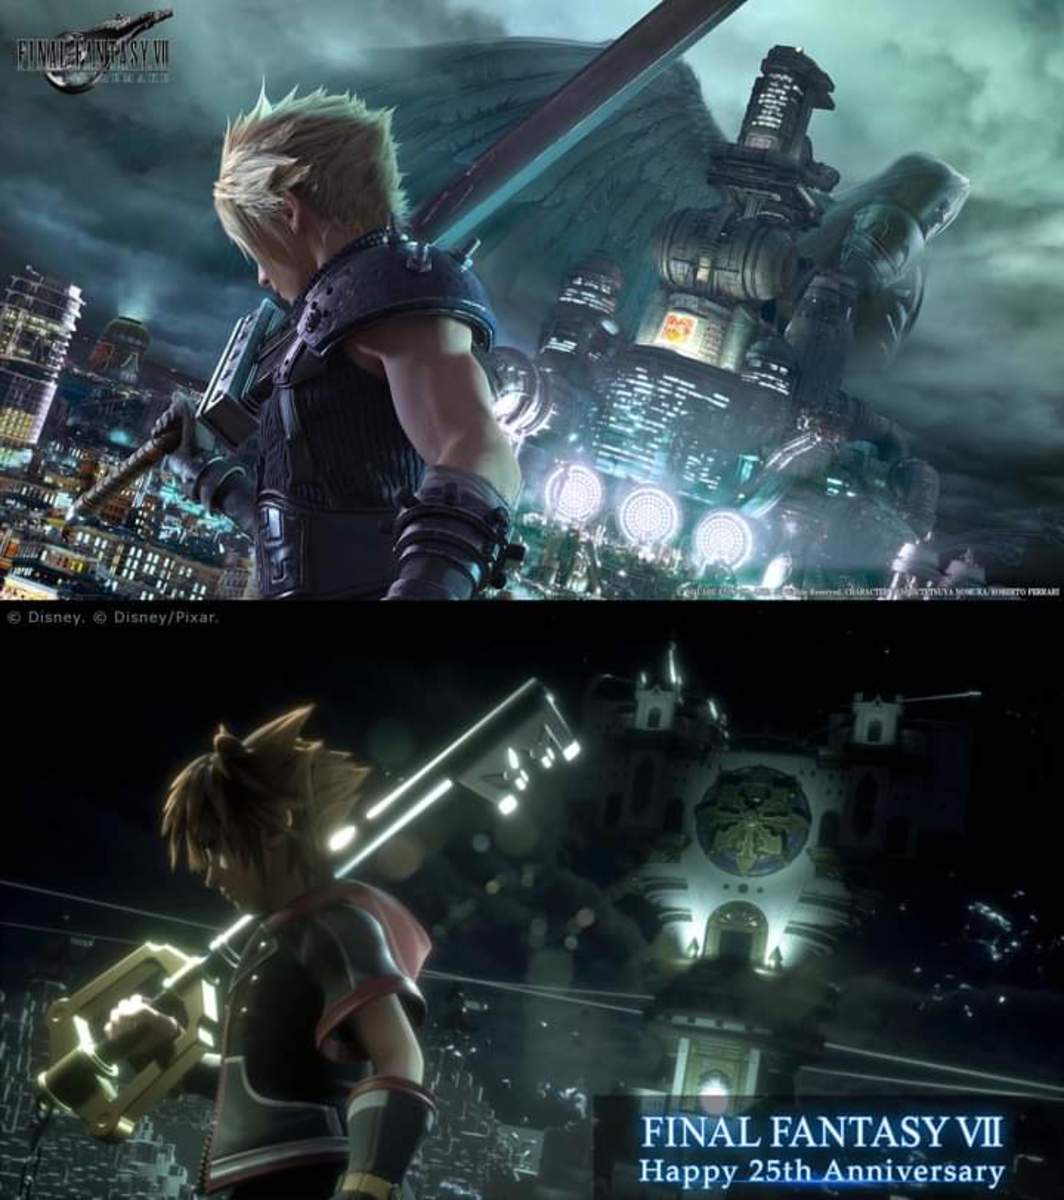 Kingdom Hearts makes an Homage to Final Fantasy VII in its 25th Anniversary